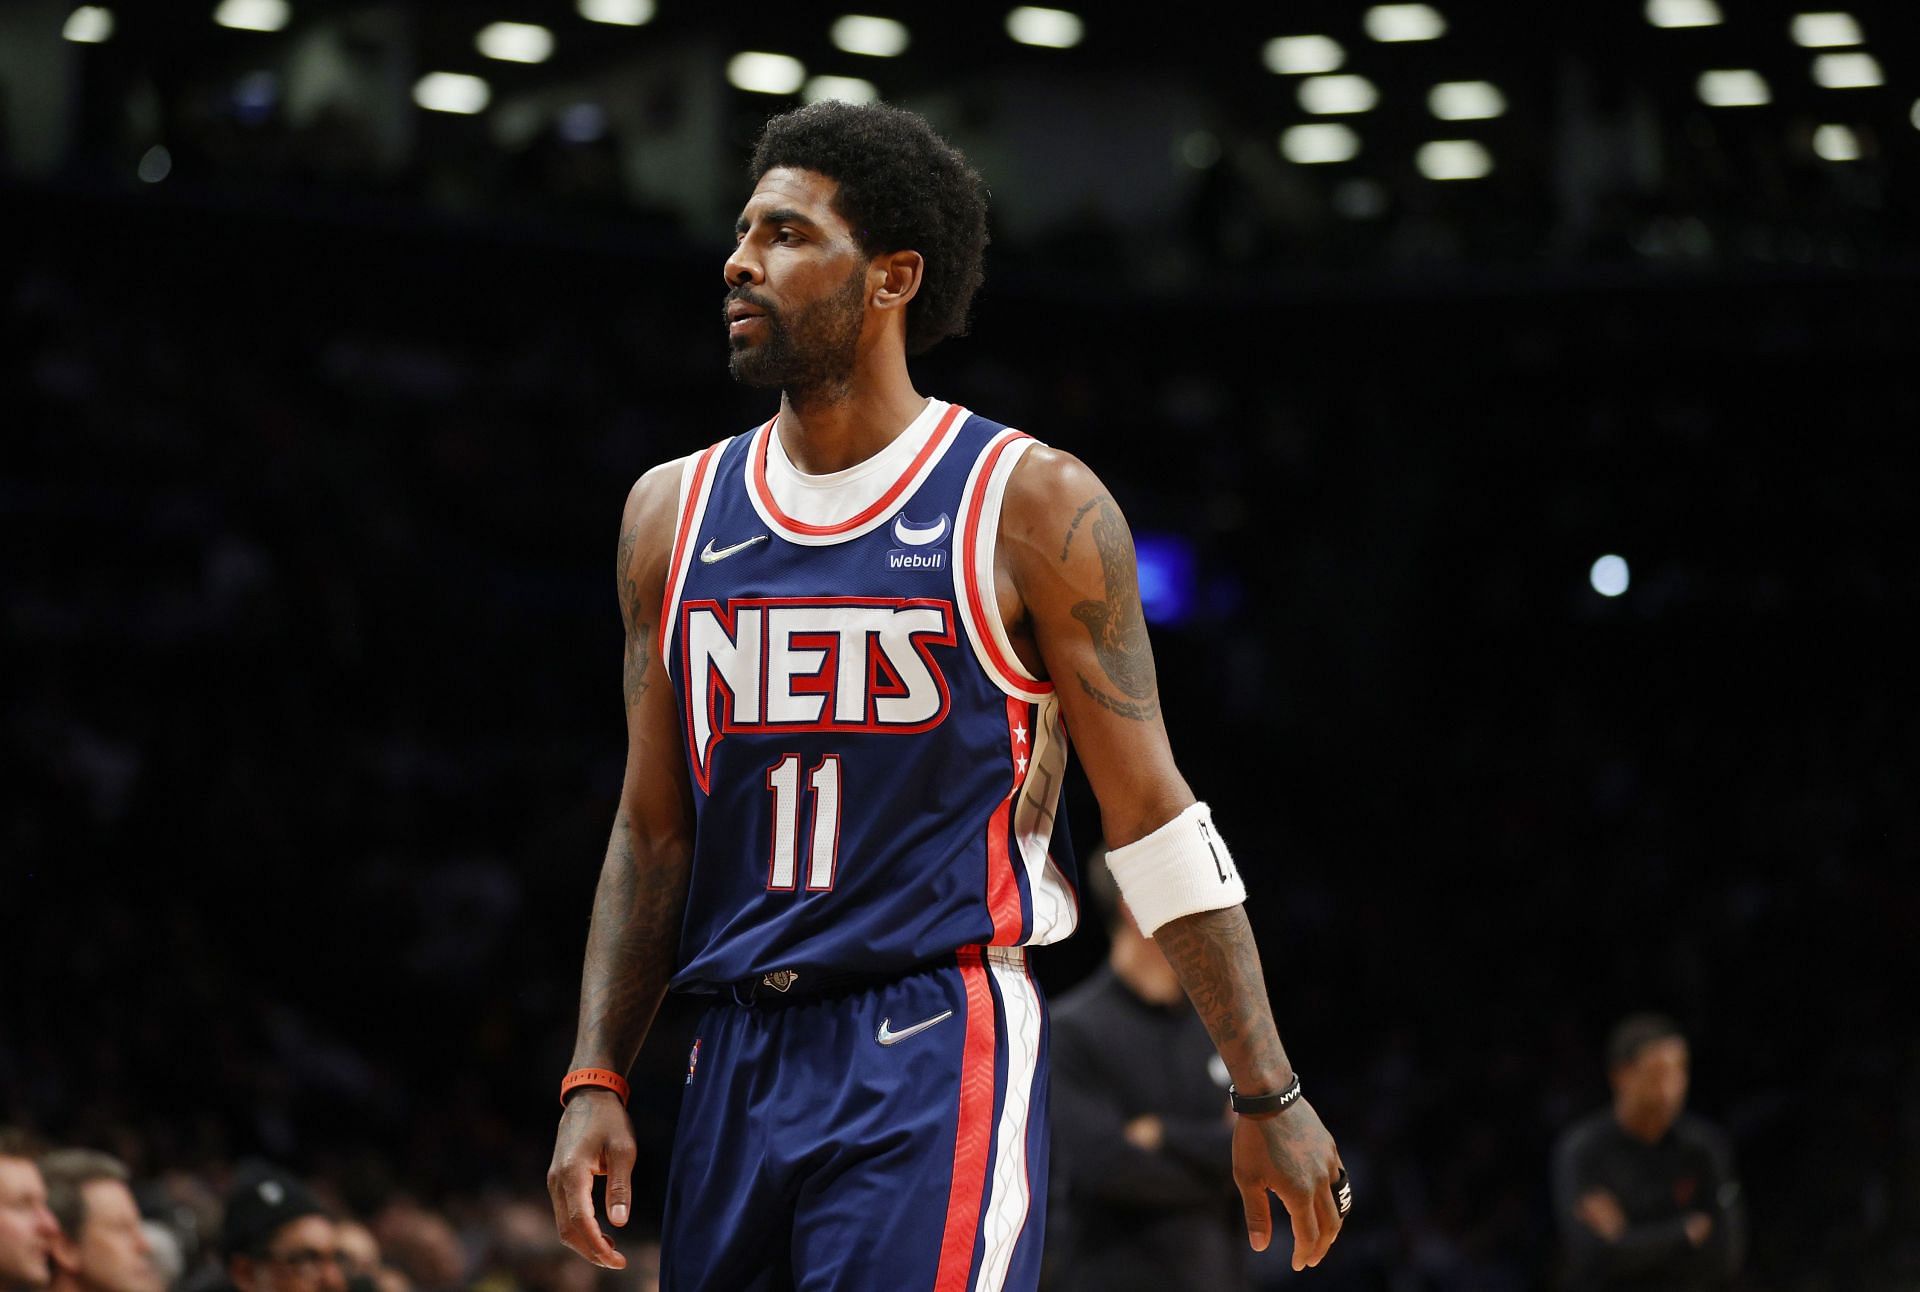 Brooklyn Nets star point guard Kyrie Irving